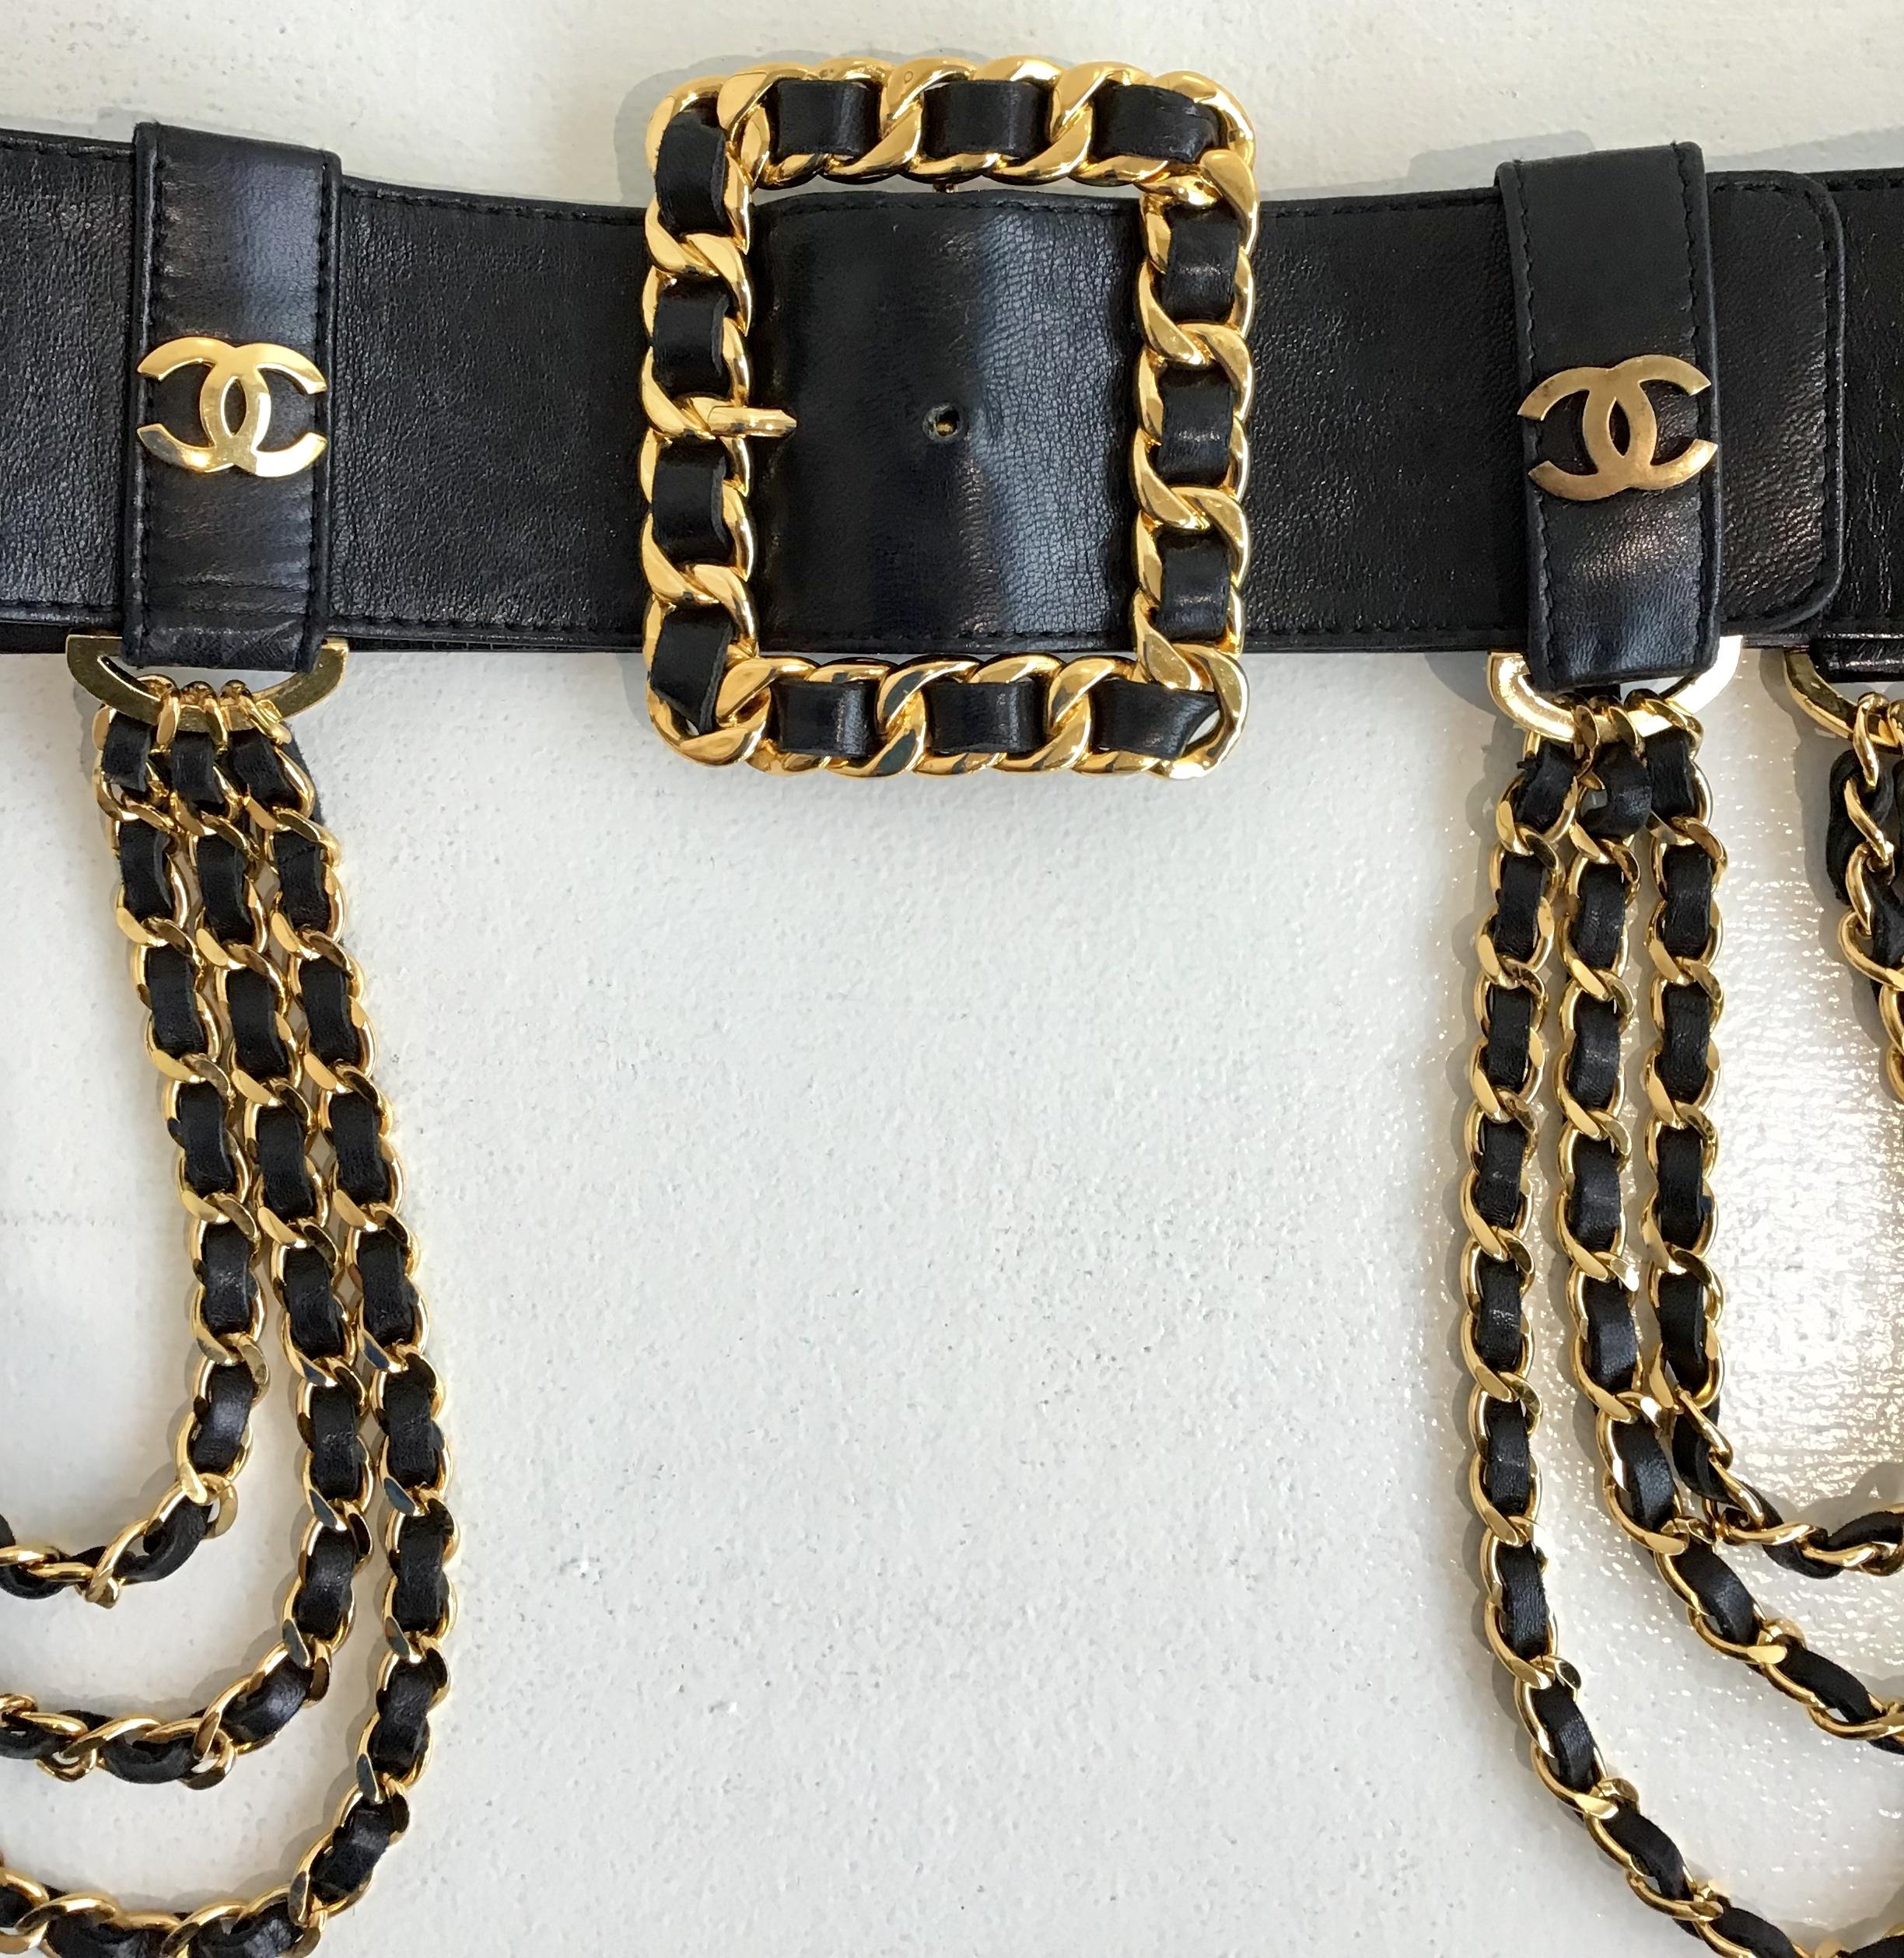 Chanel Black Wide Leather Multi Chain and Logo Belt. Featuring a gold toned chain link buckle at the front, Chanel logo on either side of buckle, including 3 chains on each side draped over the hips. Size 34. 